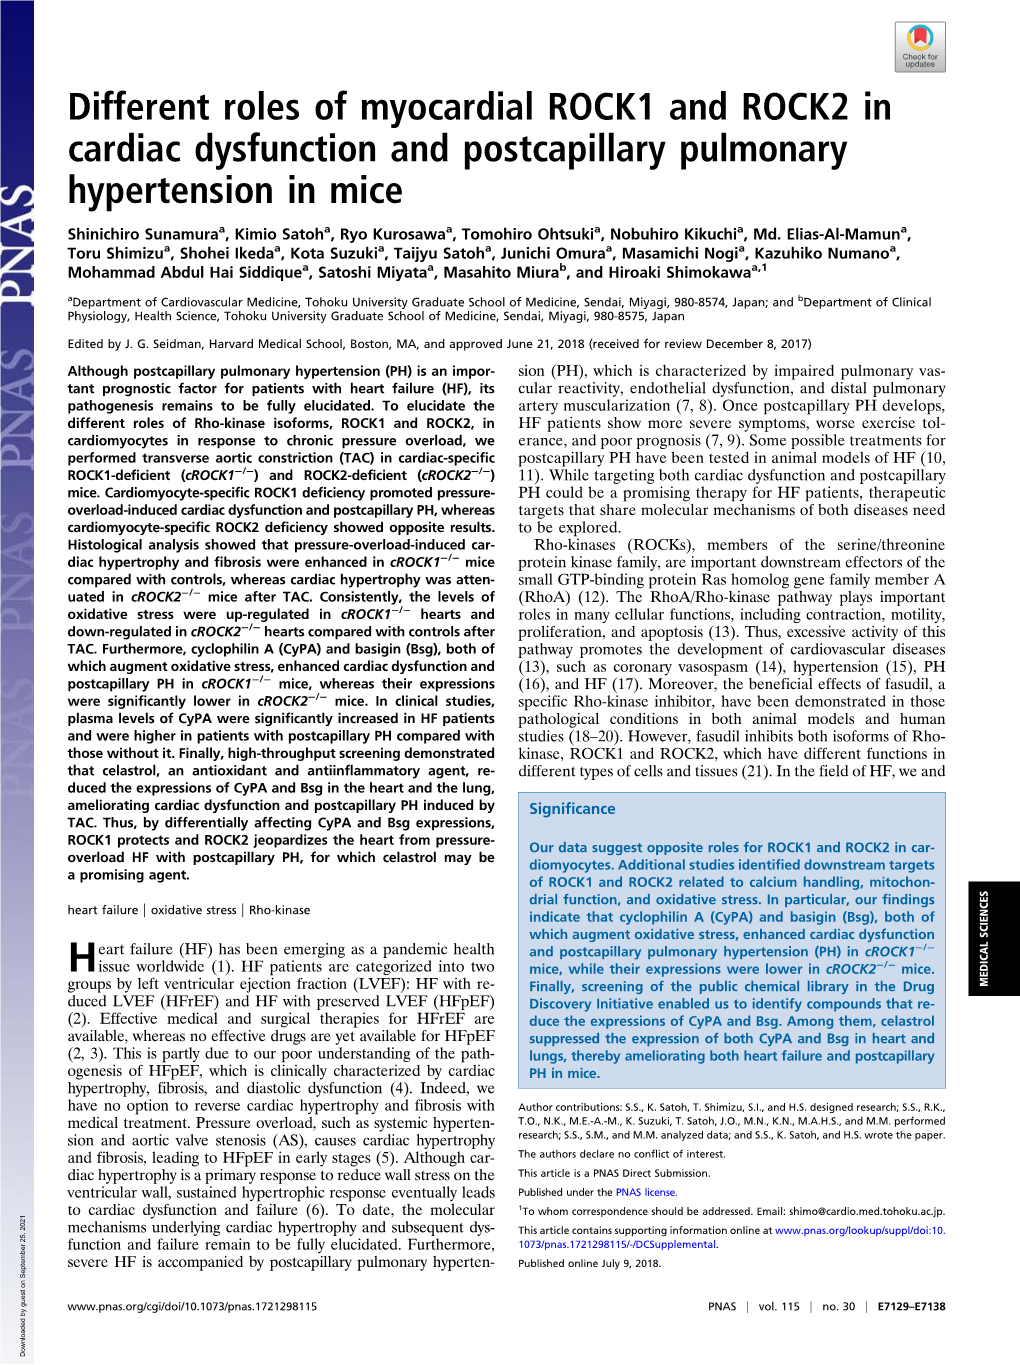 Different Roles of Myocardial ROCK1 and ROCK2 in Cardiac Dysfunction and Postcapillary Pulmonary Hypertension in Mice